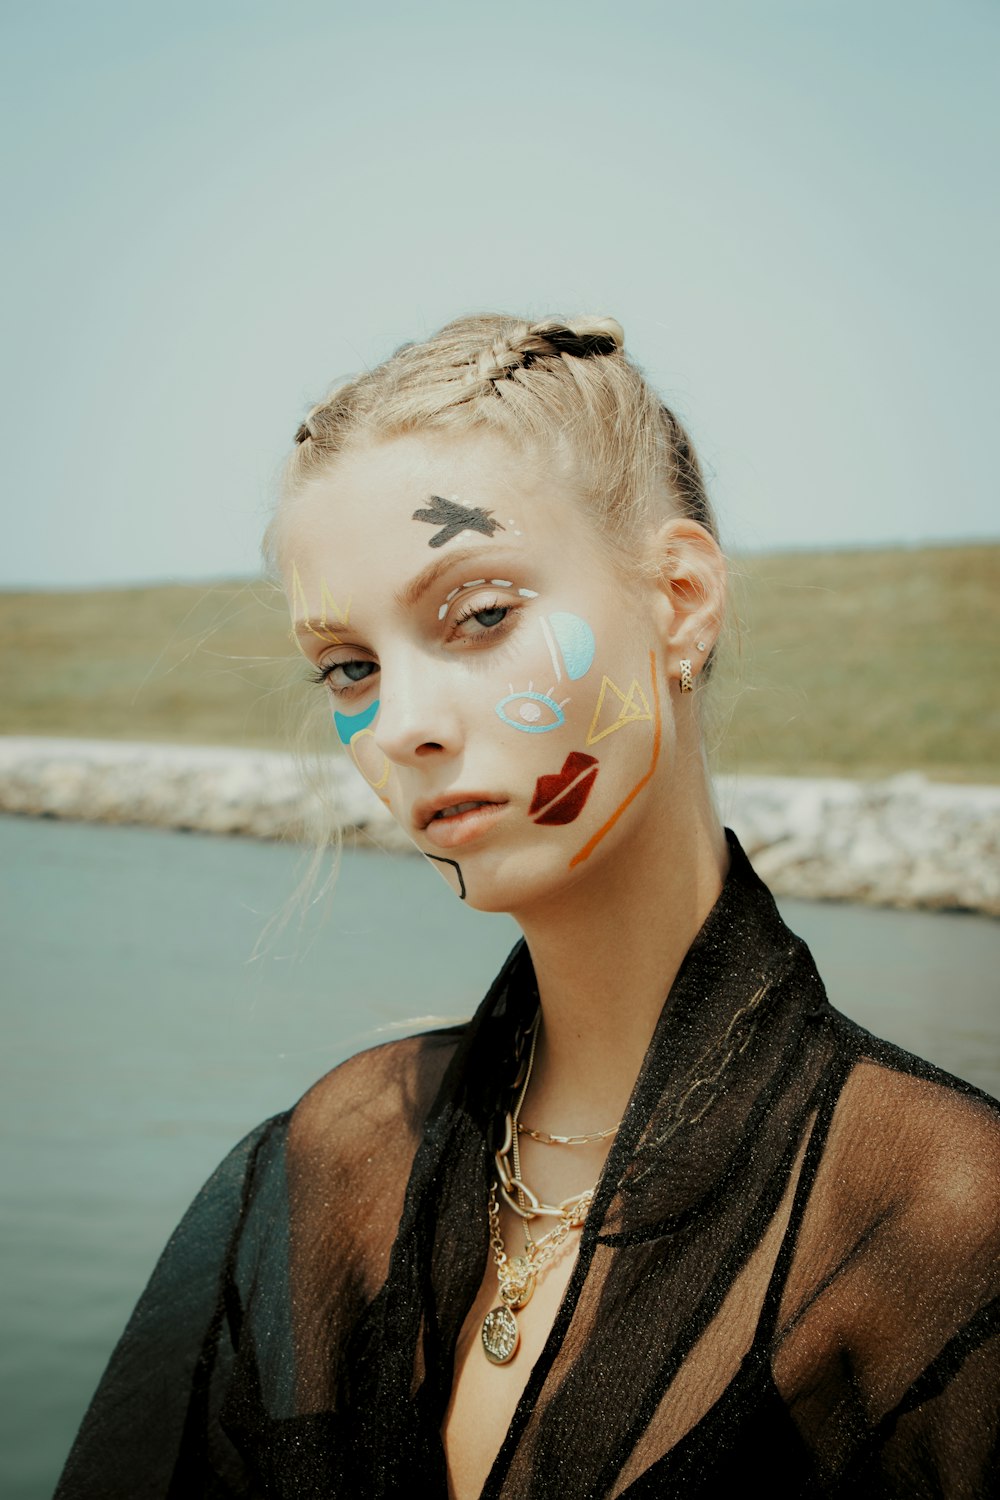 a woman with face paint on her face near a body of water